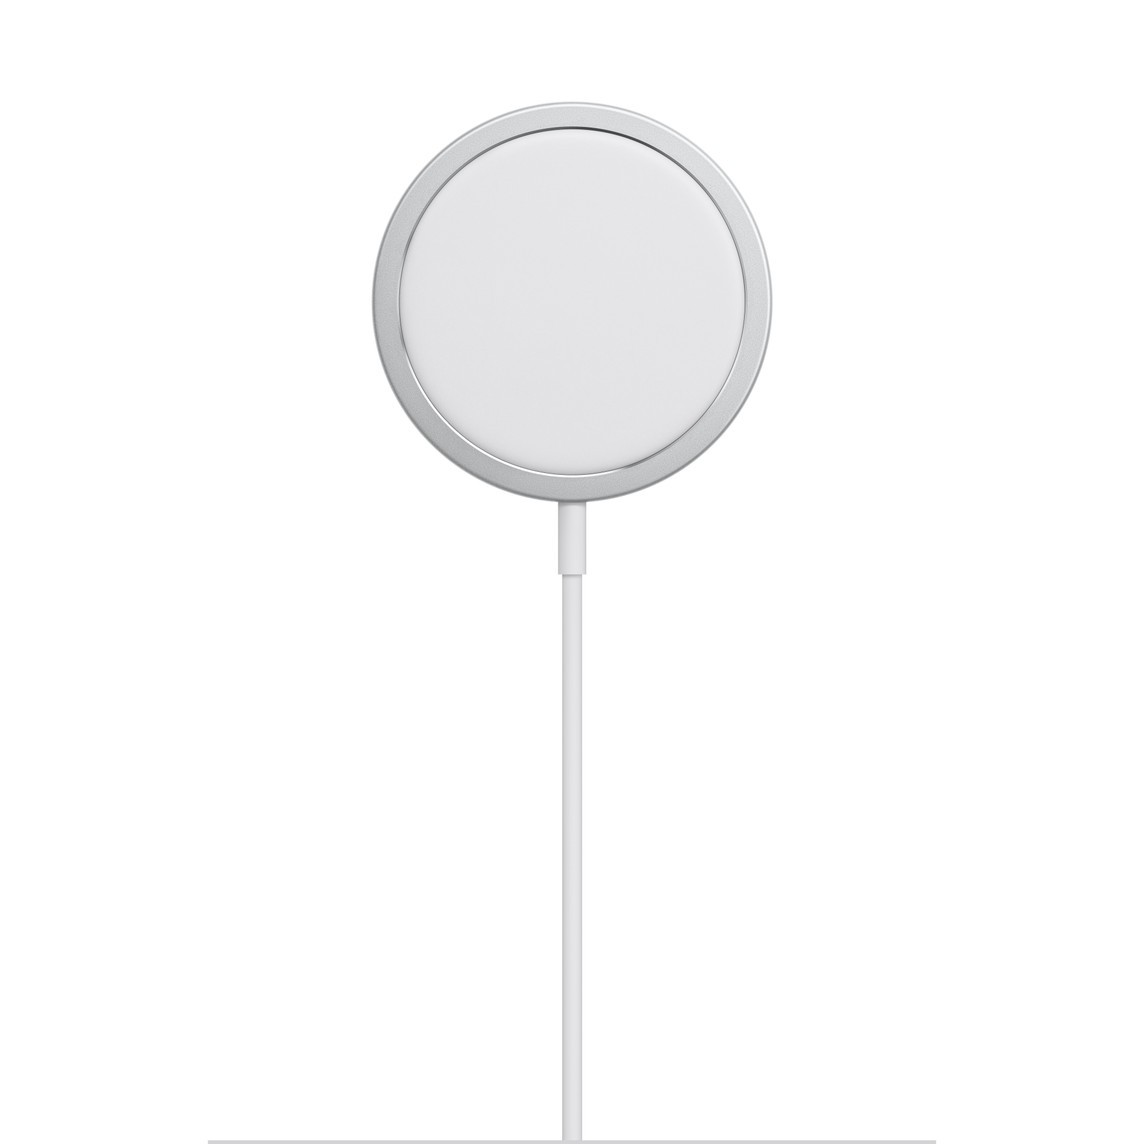 The MagSafe Charger features perfectly aligned magnets to provide faster wireless charging, up to 15 watts.